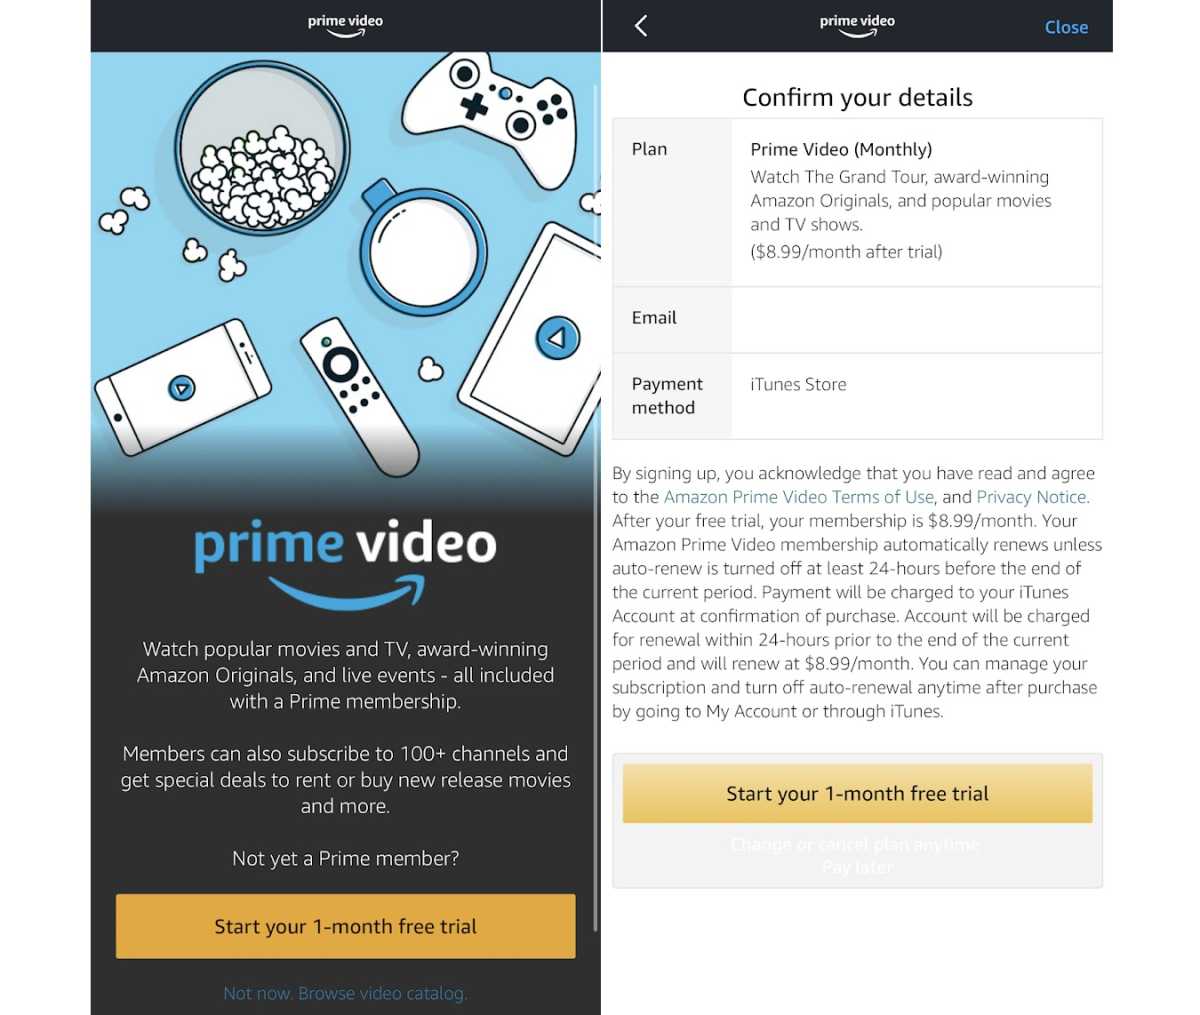 Prime Video signup on iOS